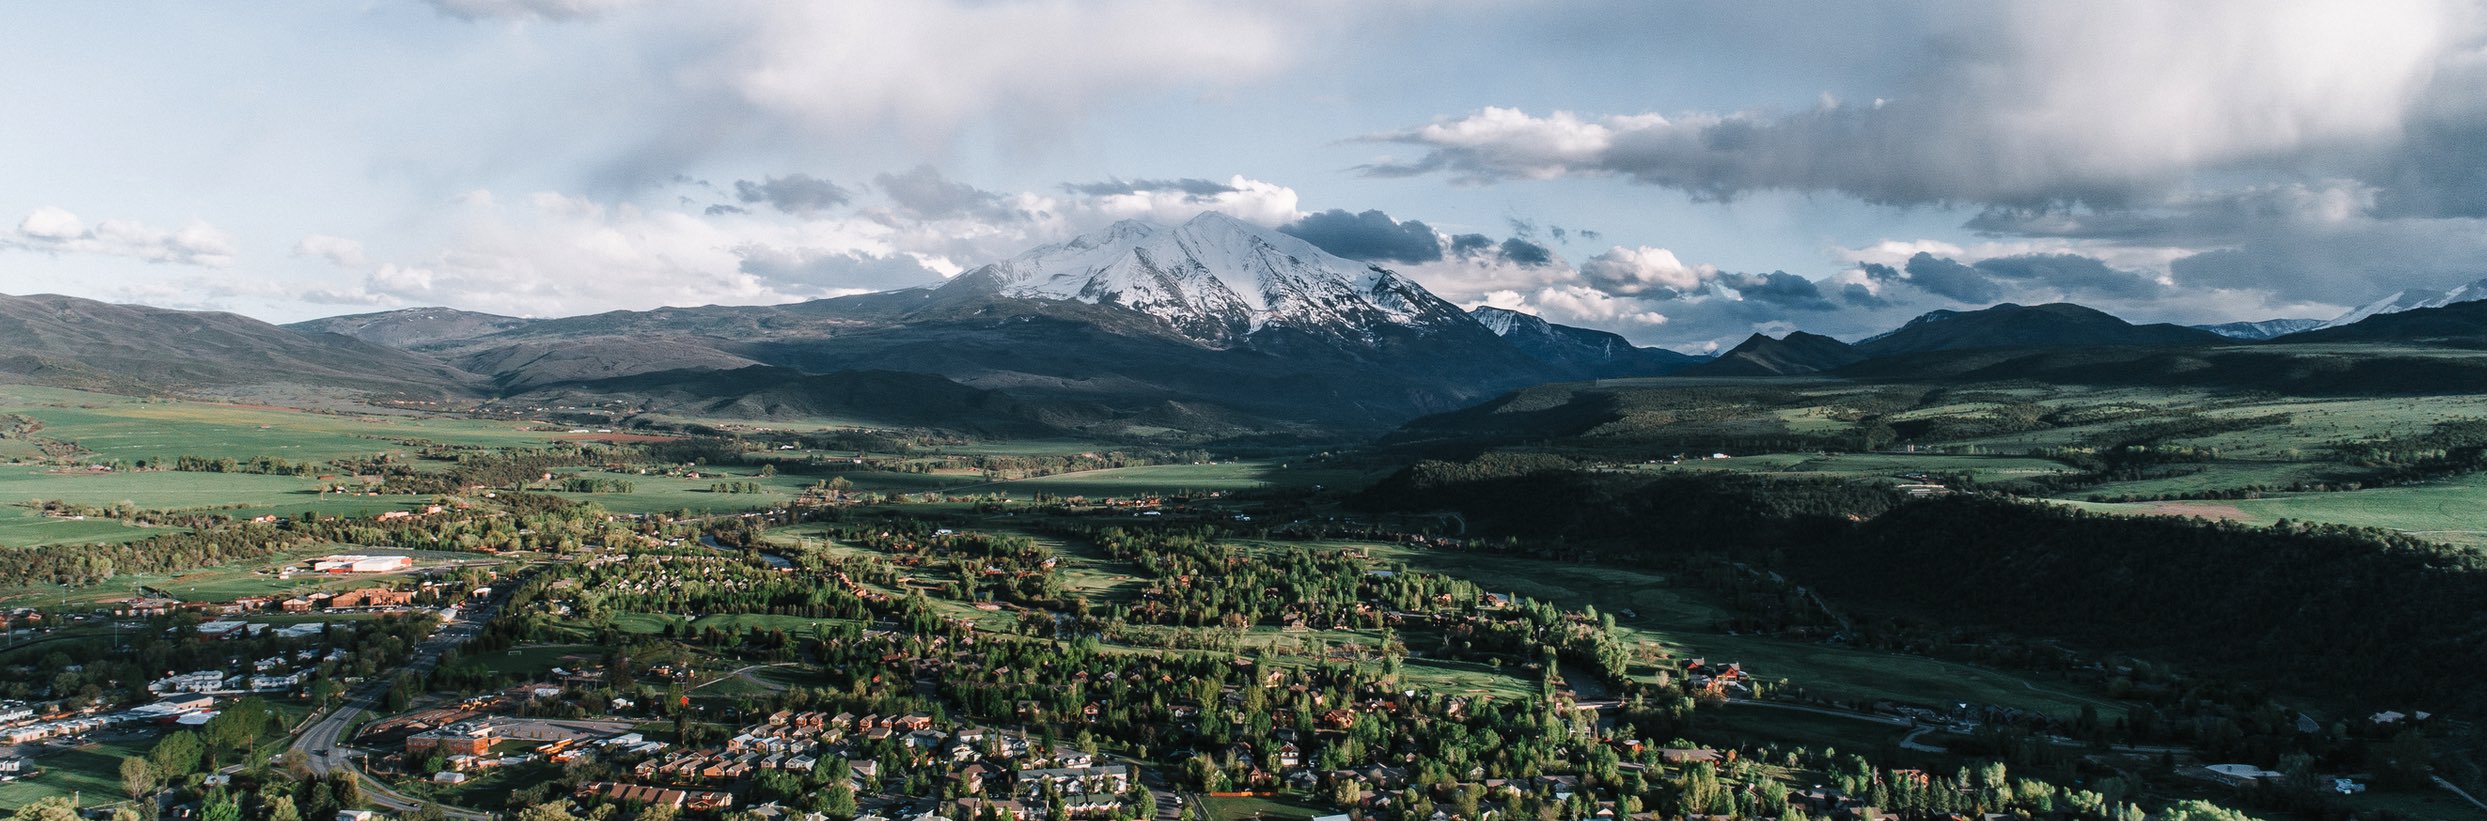 An image capturing the snowcapped majesty of Mount Sopris, overlooking the town of Carbondale below, framed by vibrant green trees.